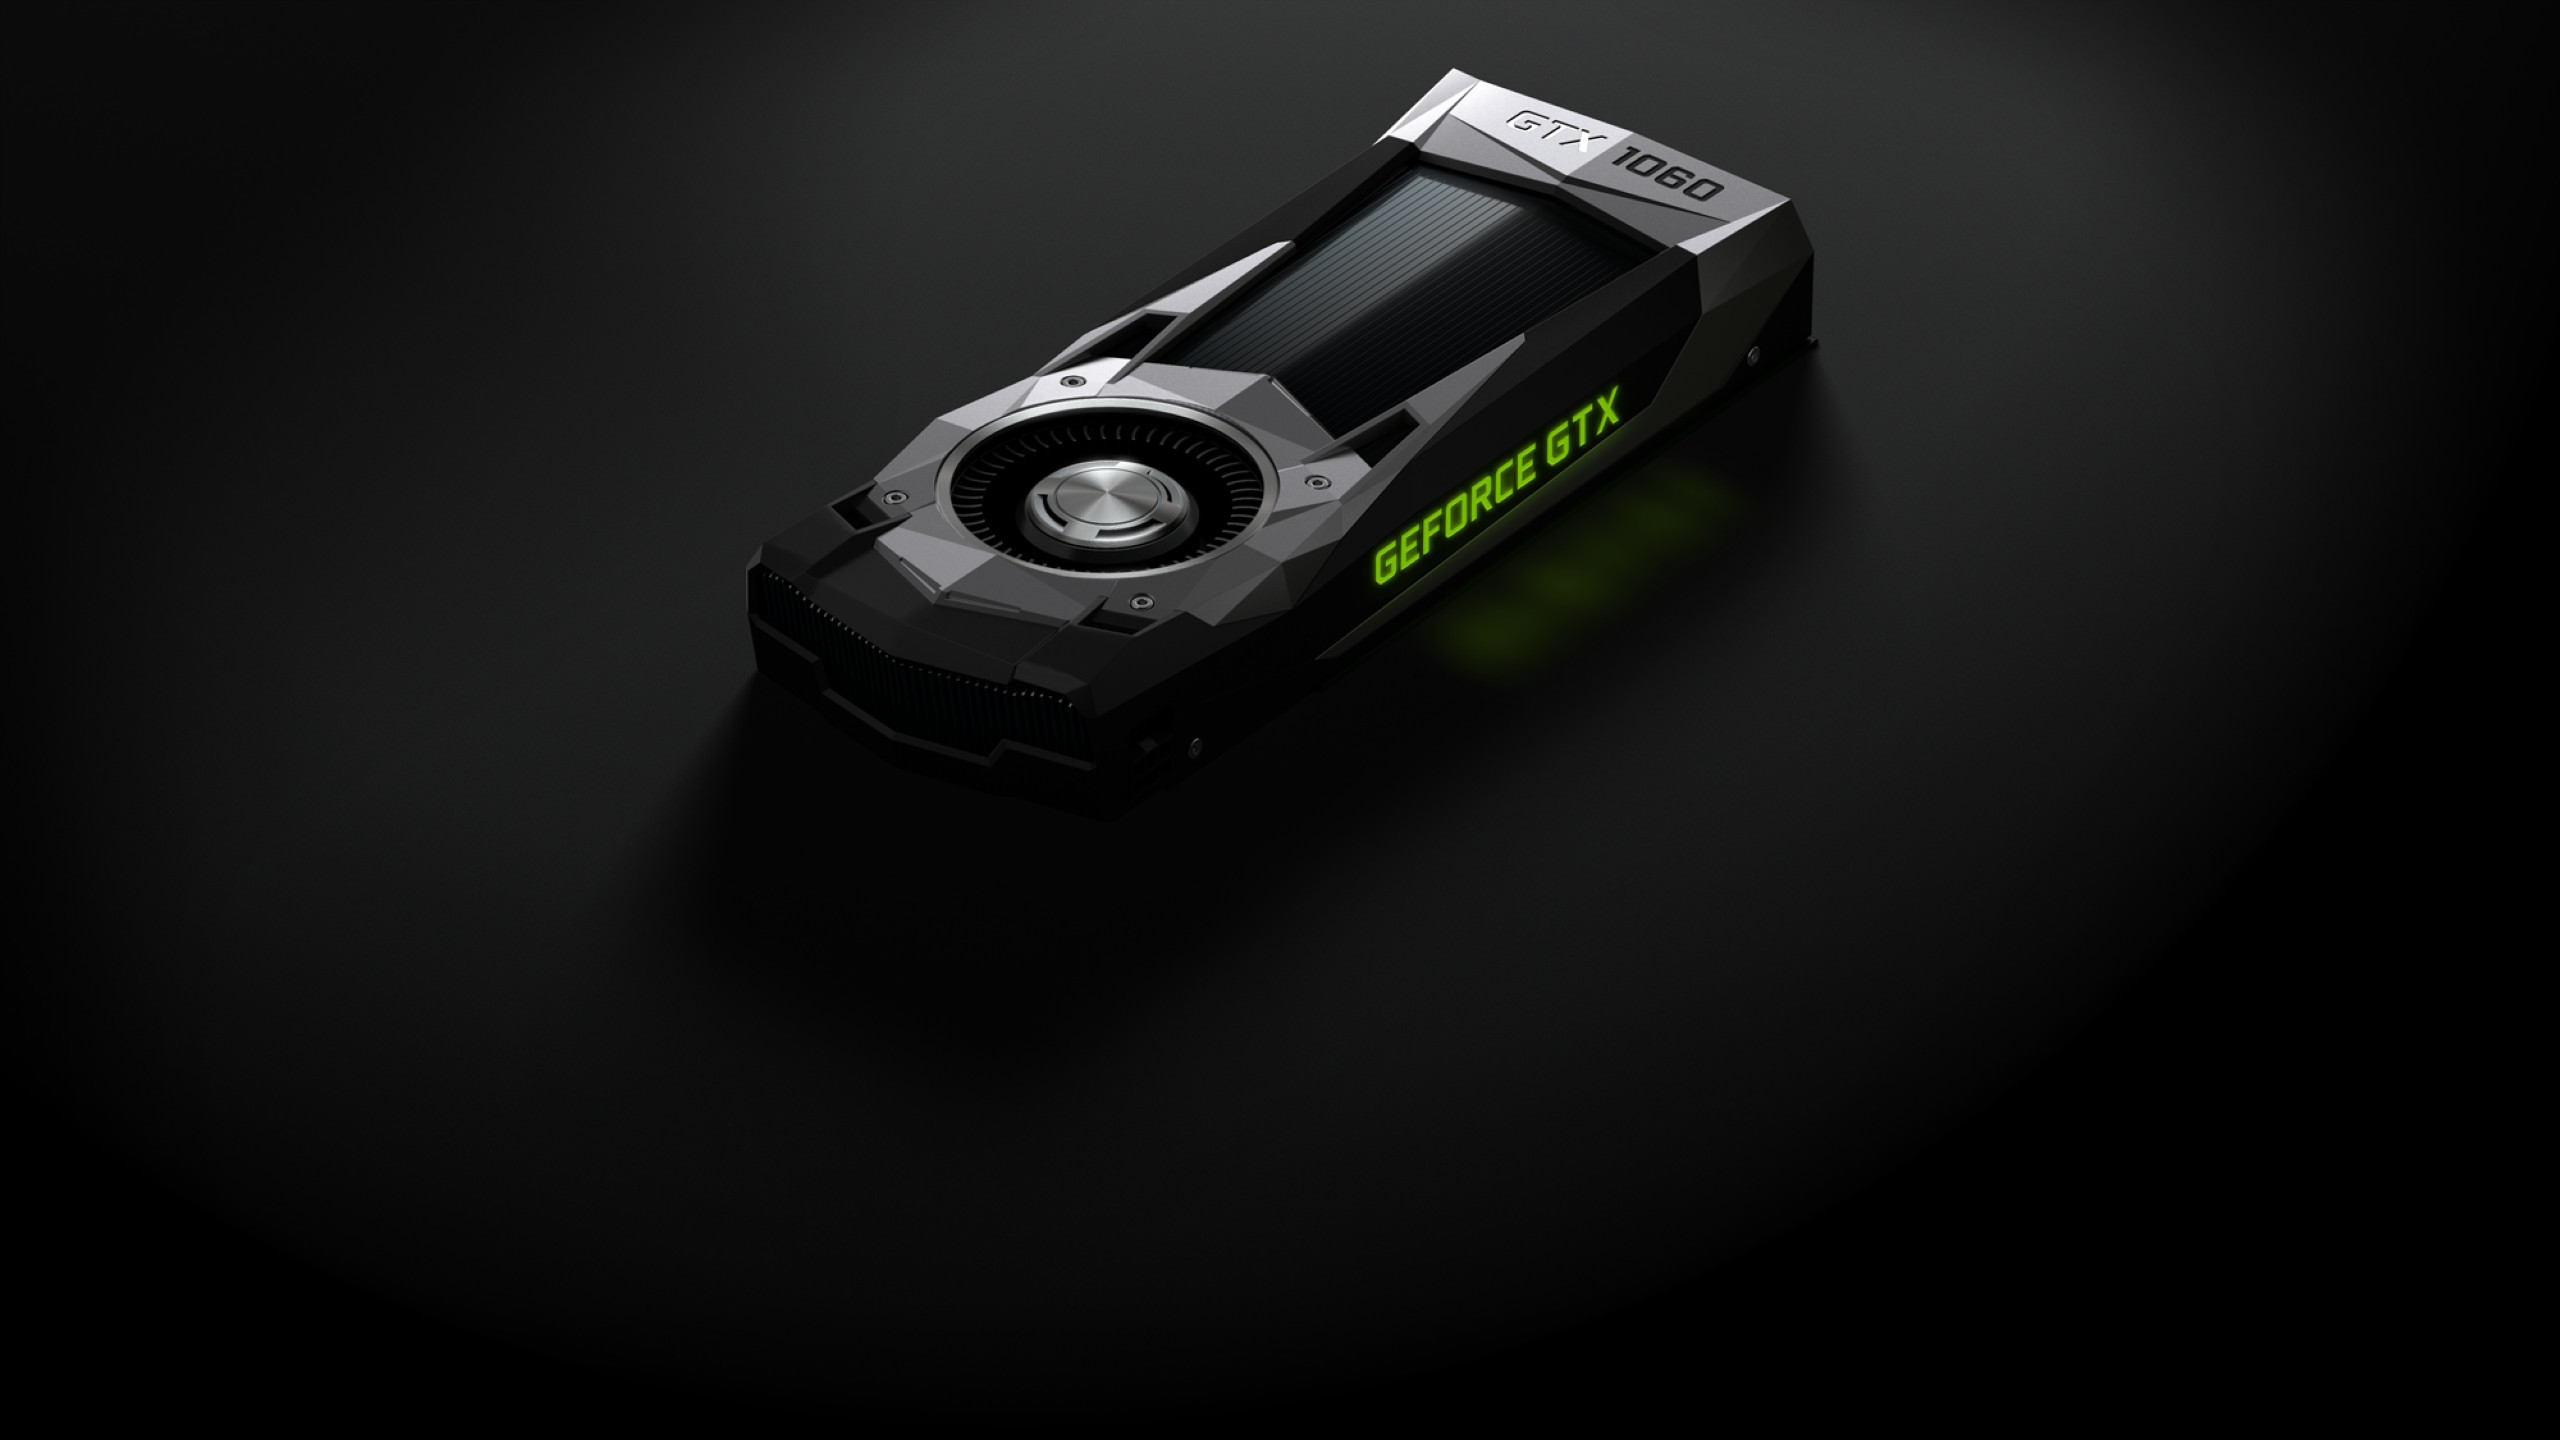 2560x1440 Gtx 1080 Wallpaper Awesome Nvidia Geforce Gtx 1060 6 Gb Unveiled for $249 Us